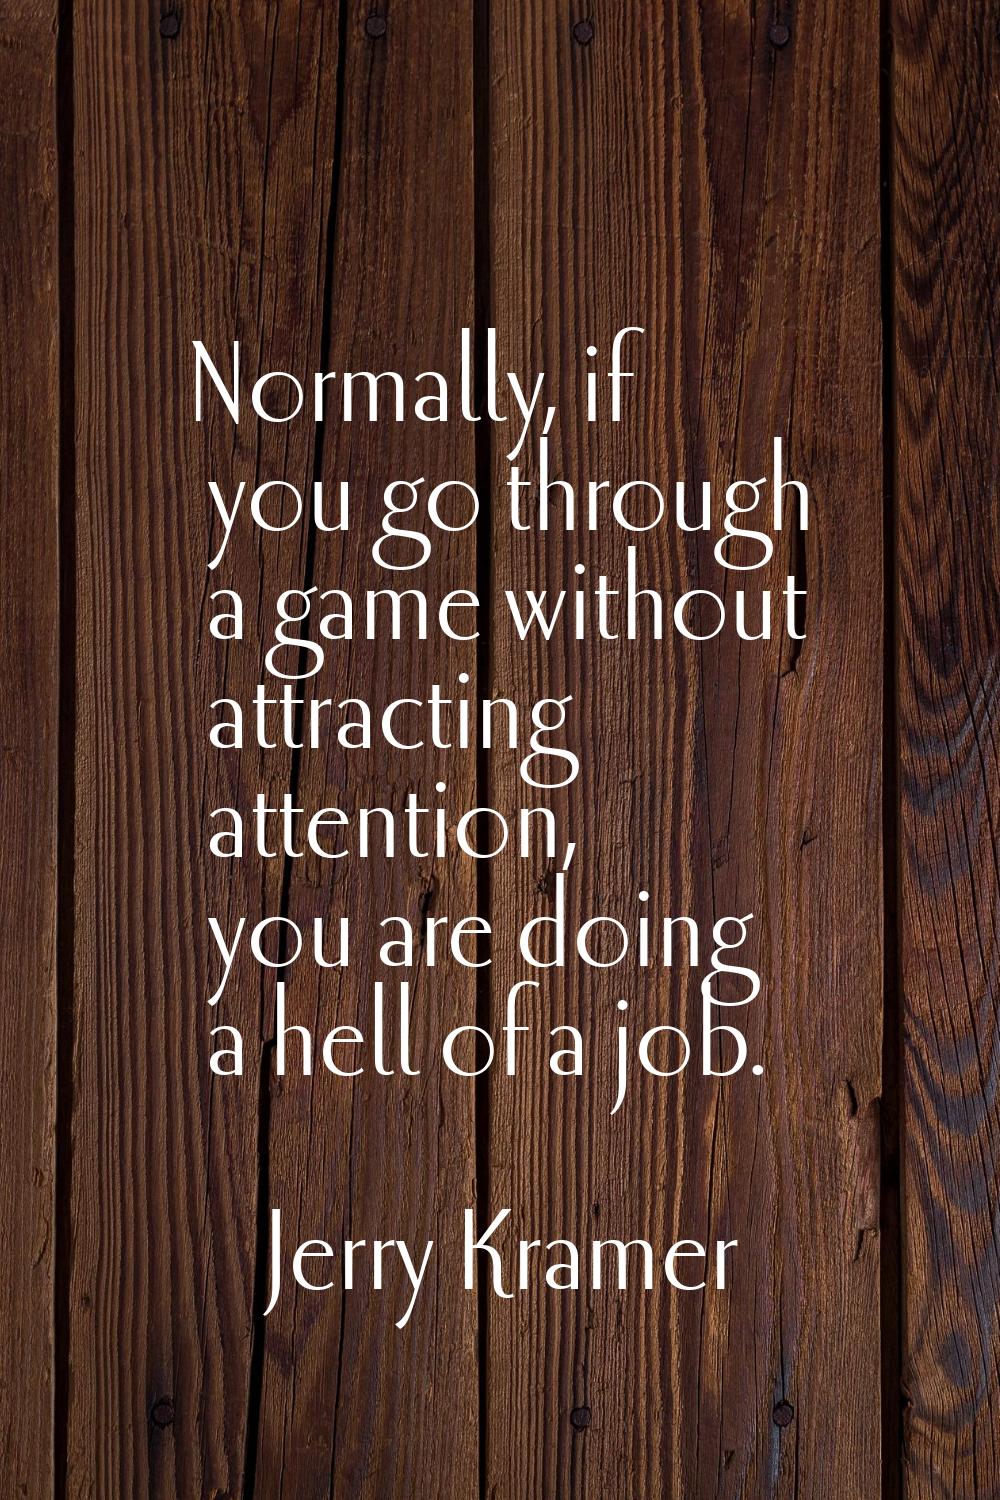 Normally, if you go through a game without attracting attention, you are doing a hell of a job.